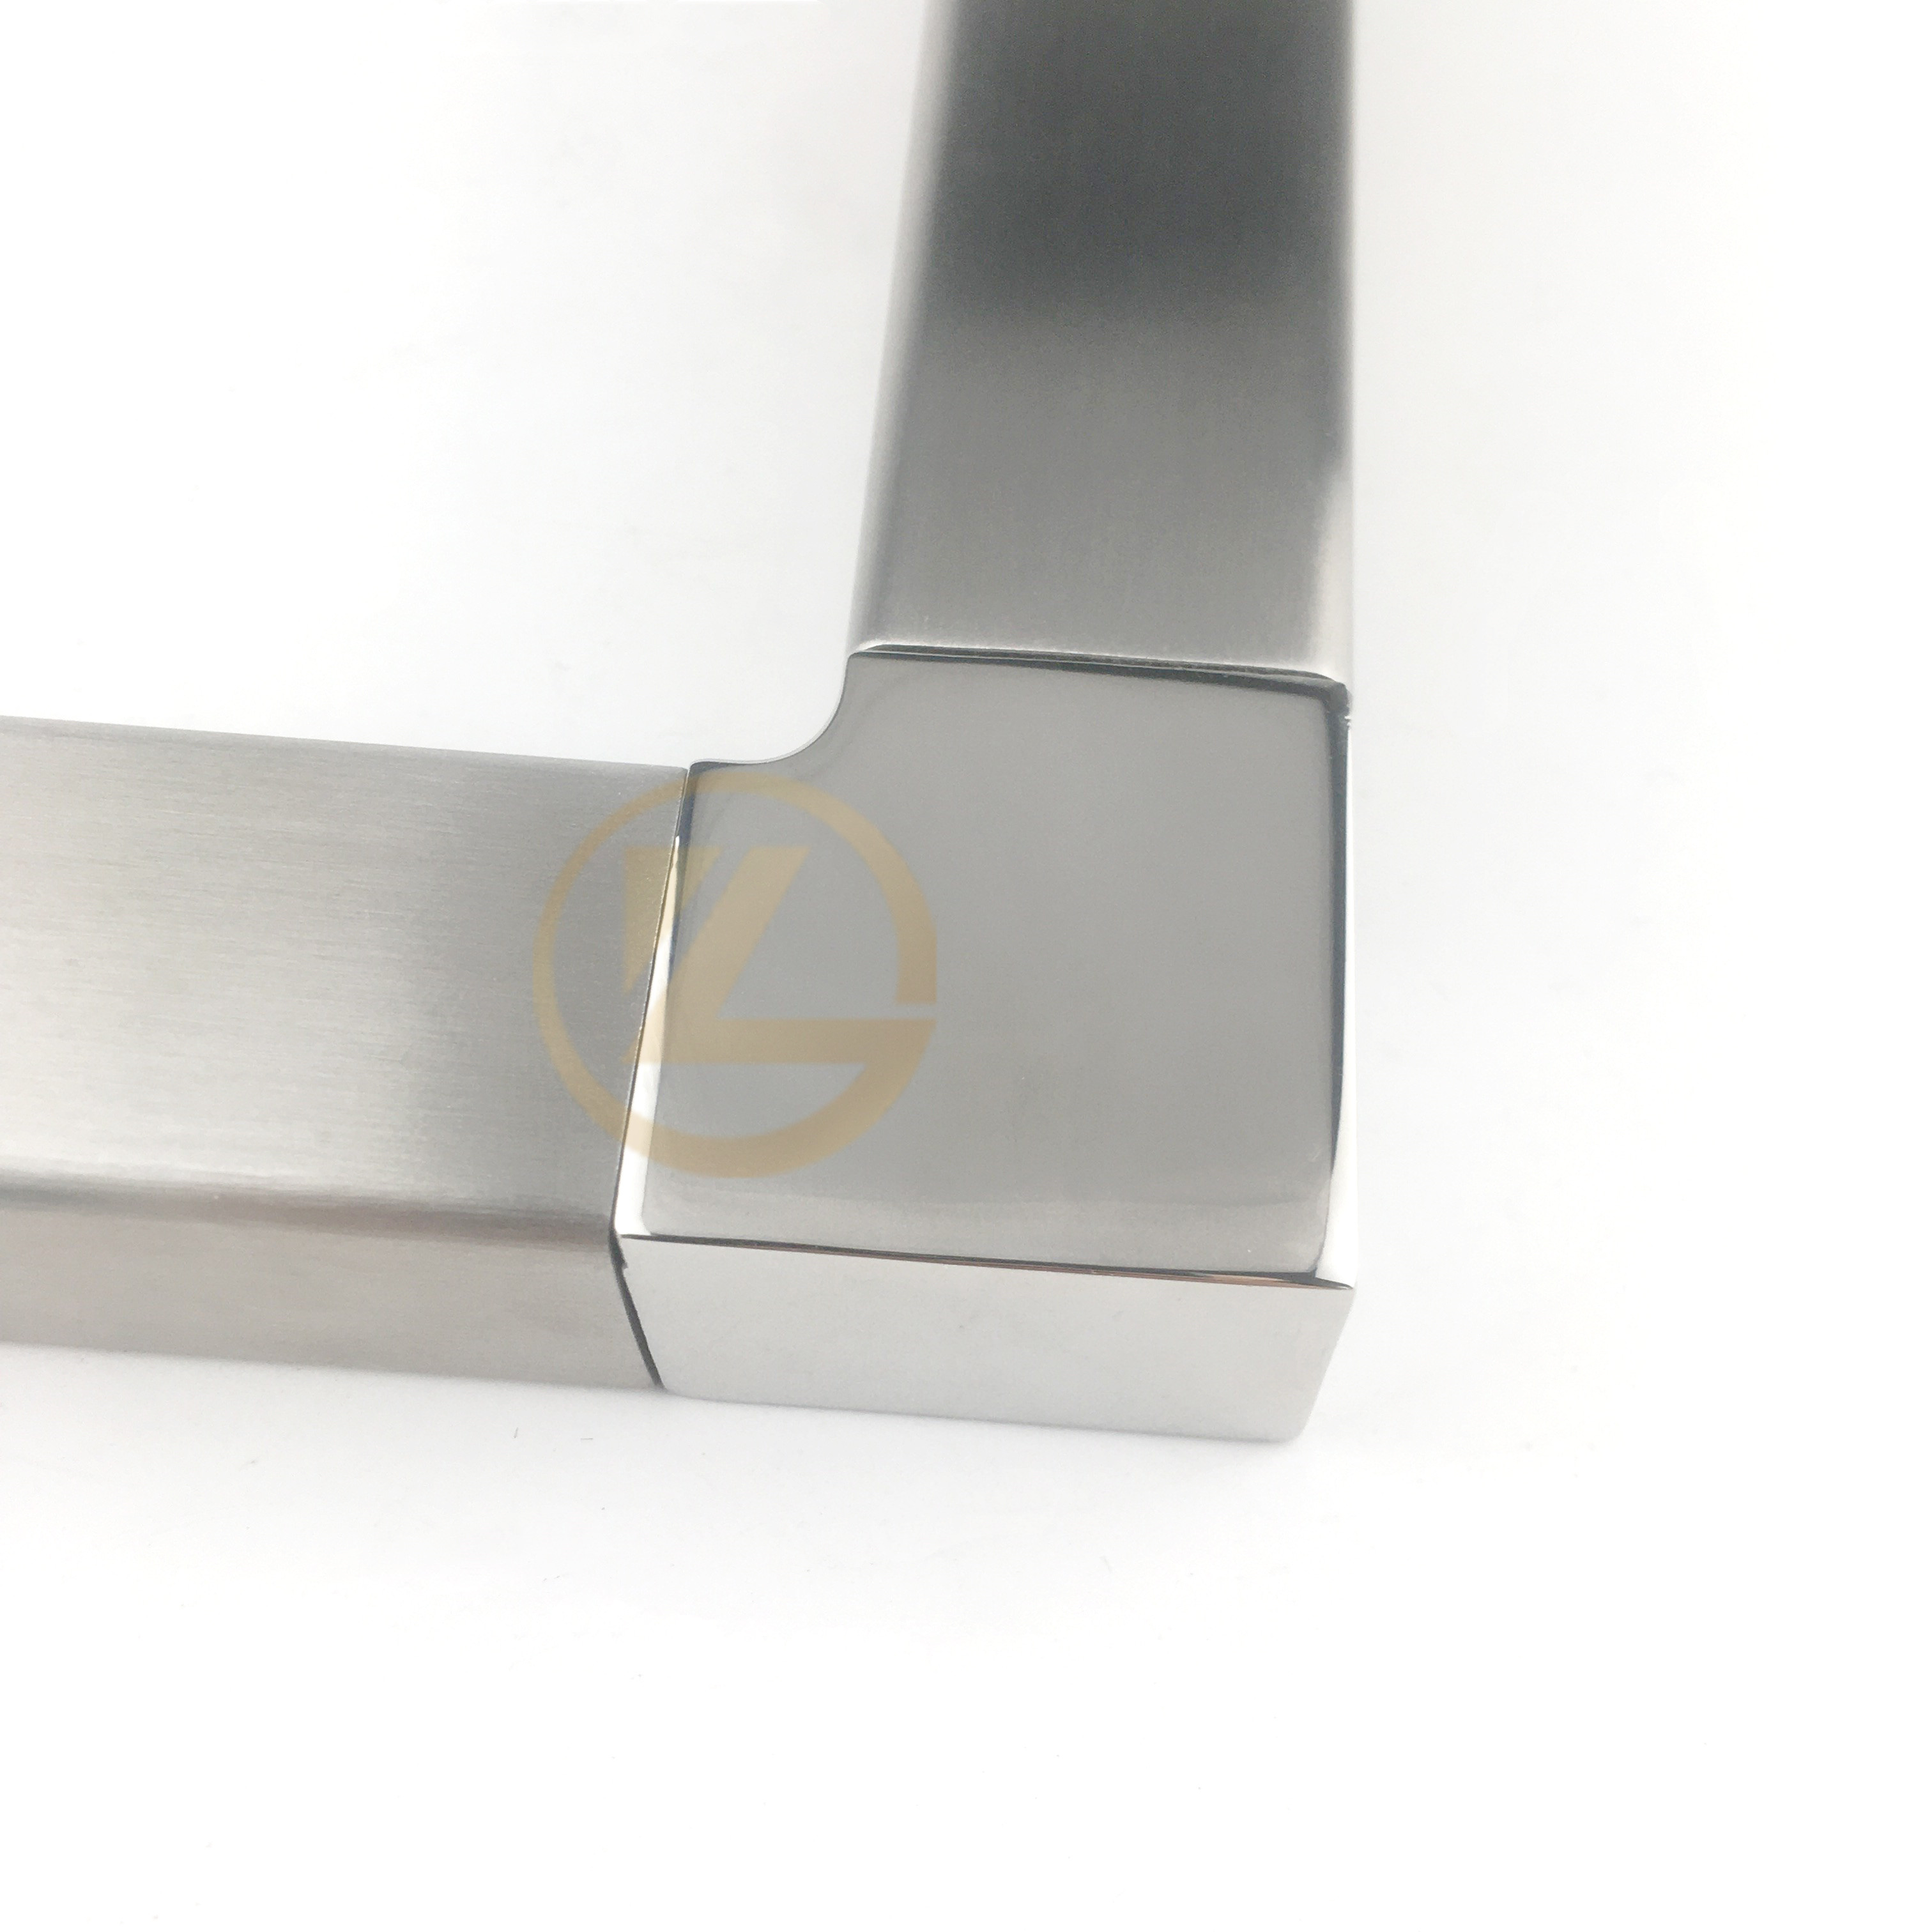 YL Stainless 90 degree handrail connector glass balustrade